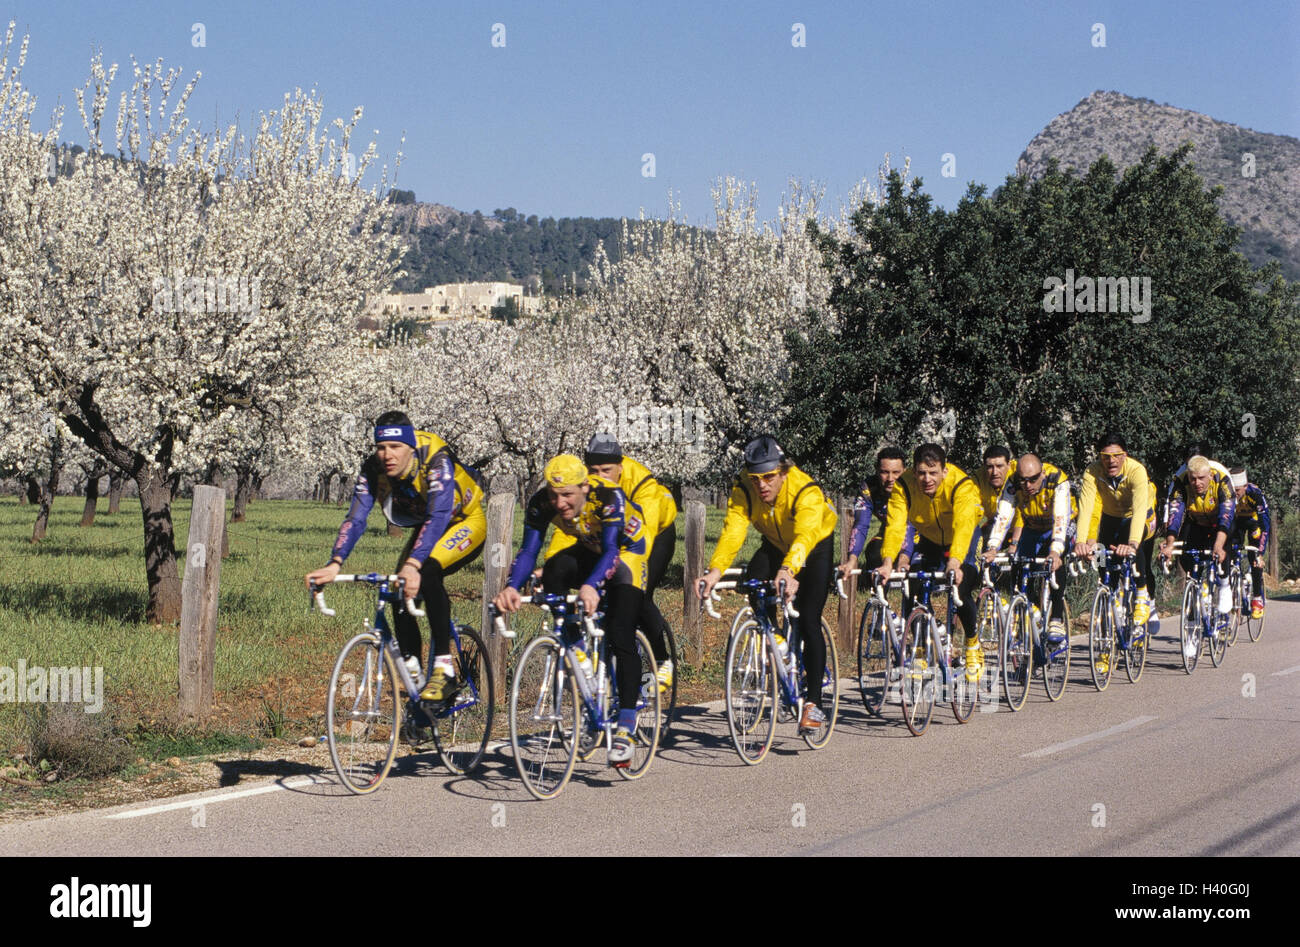 Spain, Majorca, street, racing cyclist, group, no model release the Mediterranean Sea, the Balearic Islands, island, country road, sportsman, cyclist, team, racing wheels, riding of a bike, drive, Rennradfahren, cycling tour, bicycle driving, sport, cycli Stock Photo